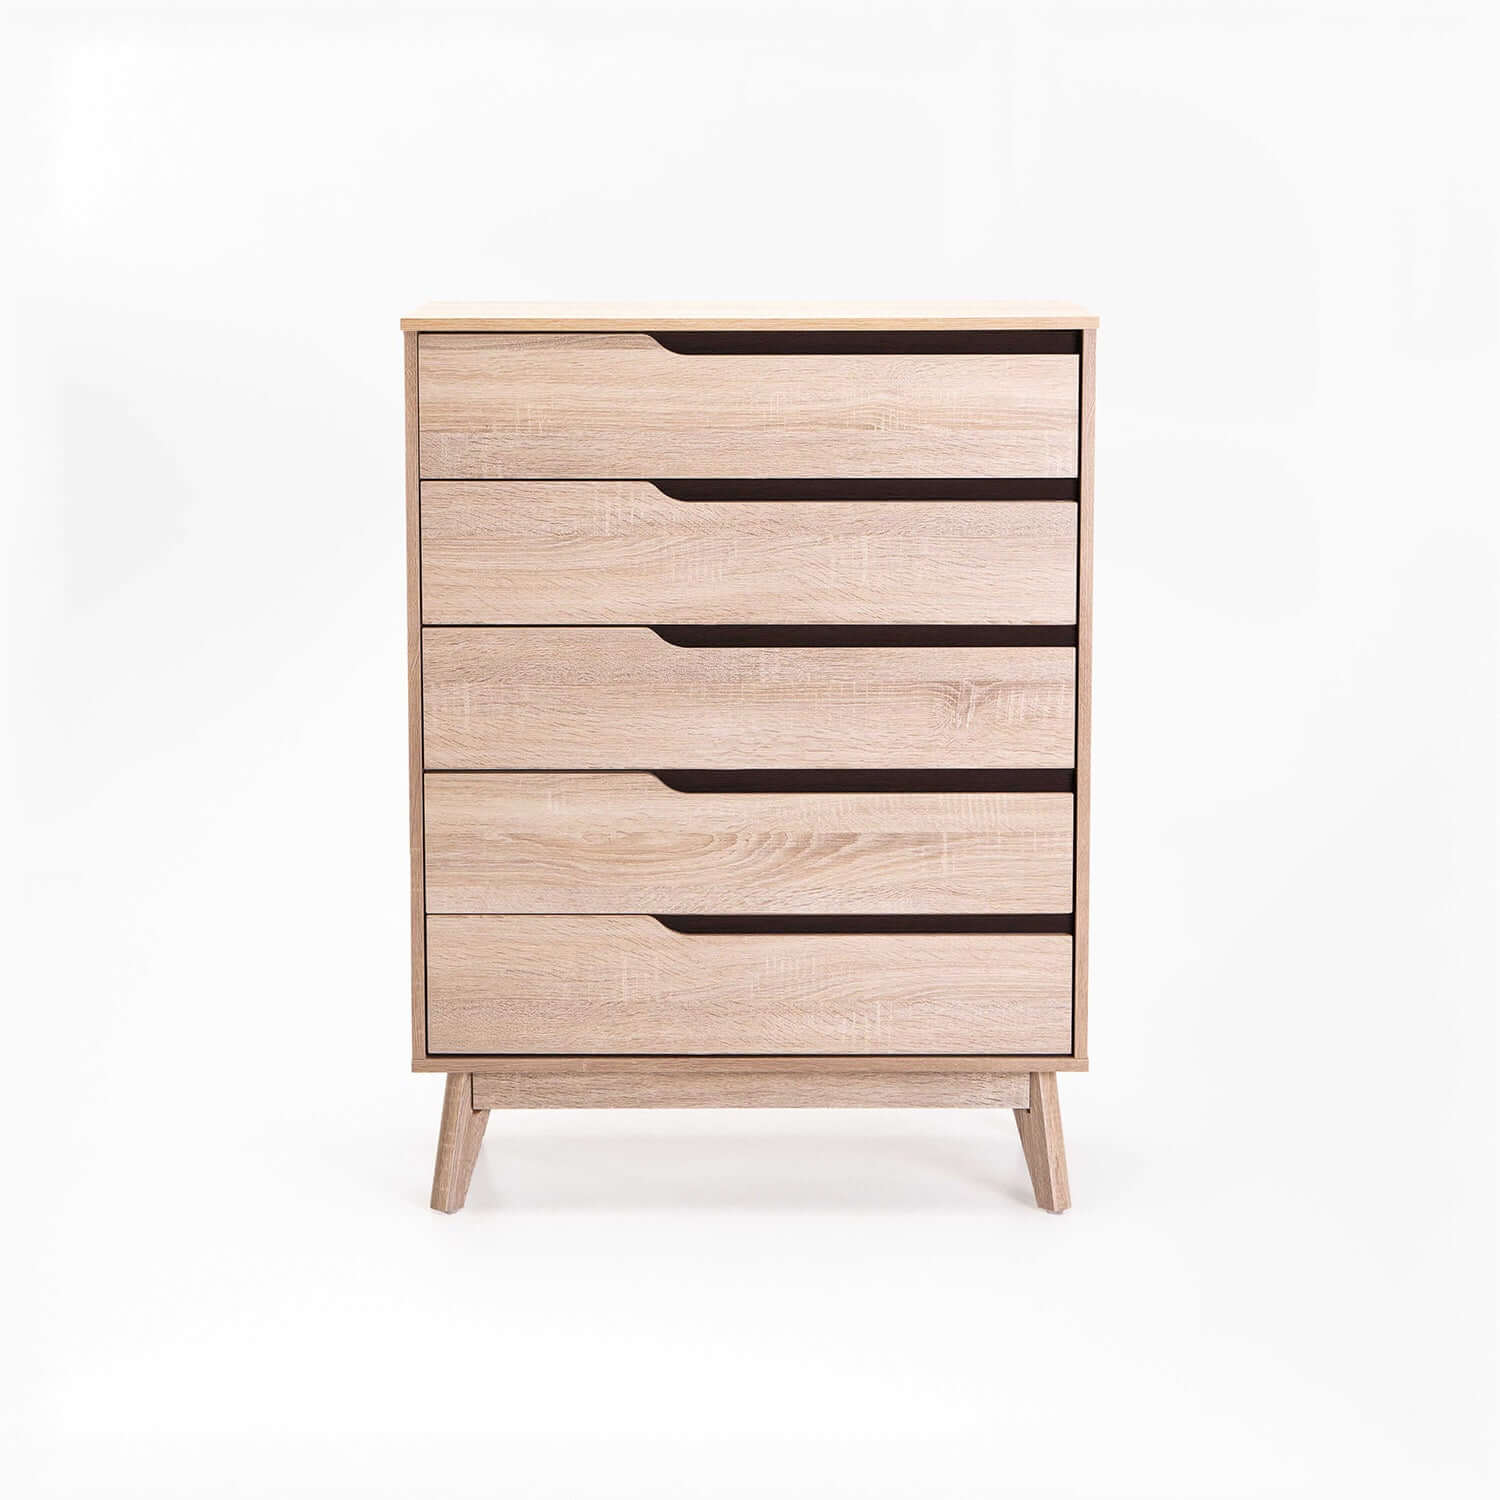 FIN DELUXE 5 DRAWER CHEST